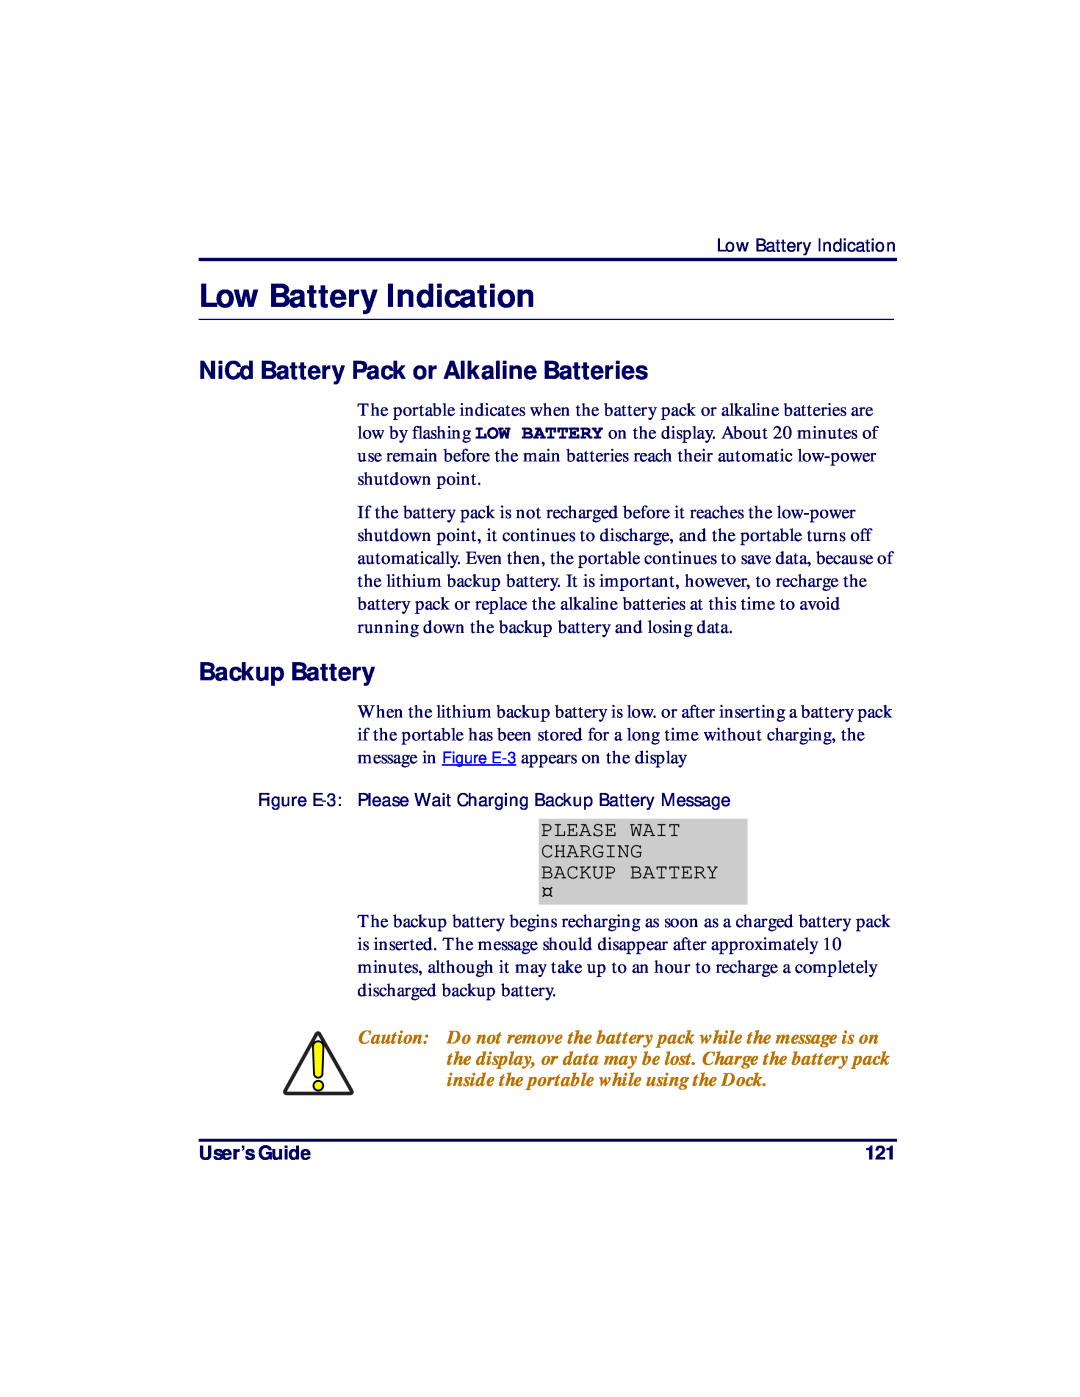 PSC PT2000, TopGun manual Low Battery Indication, NiCd Battery Pack or Alkaline Batteries, Backup Battery, User’s Guide 